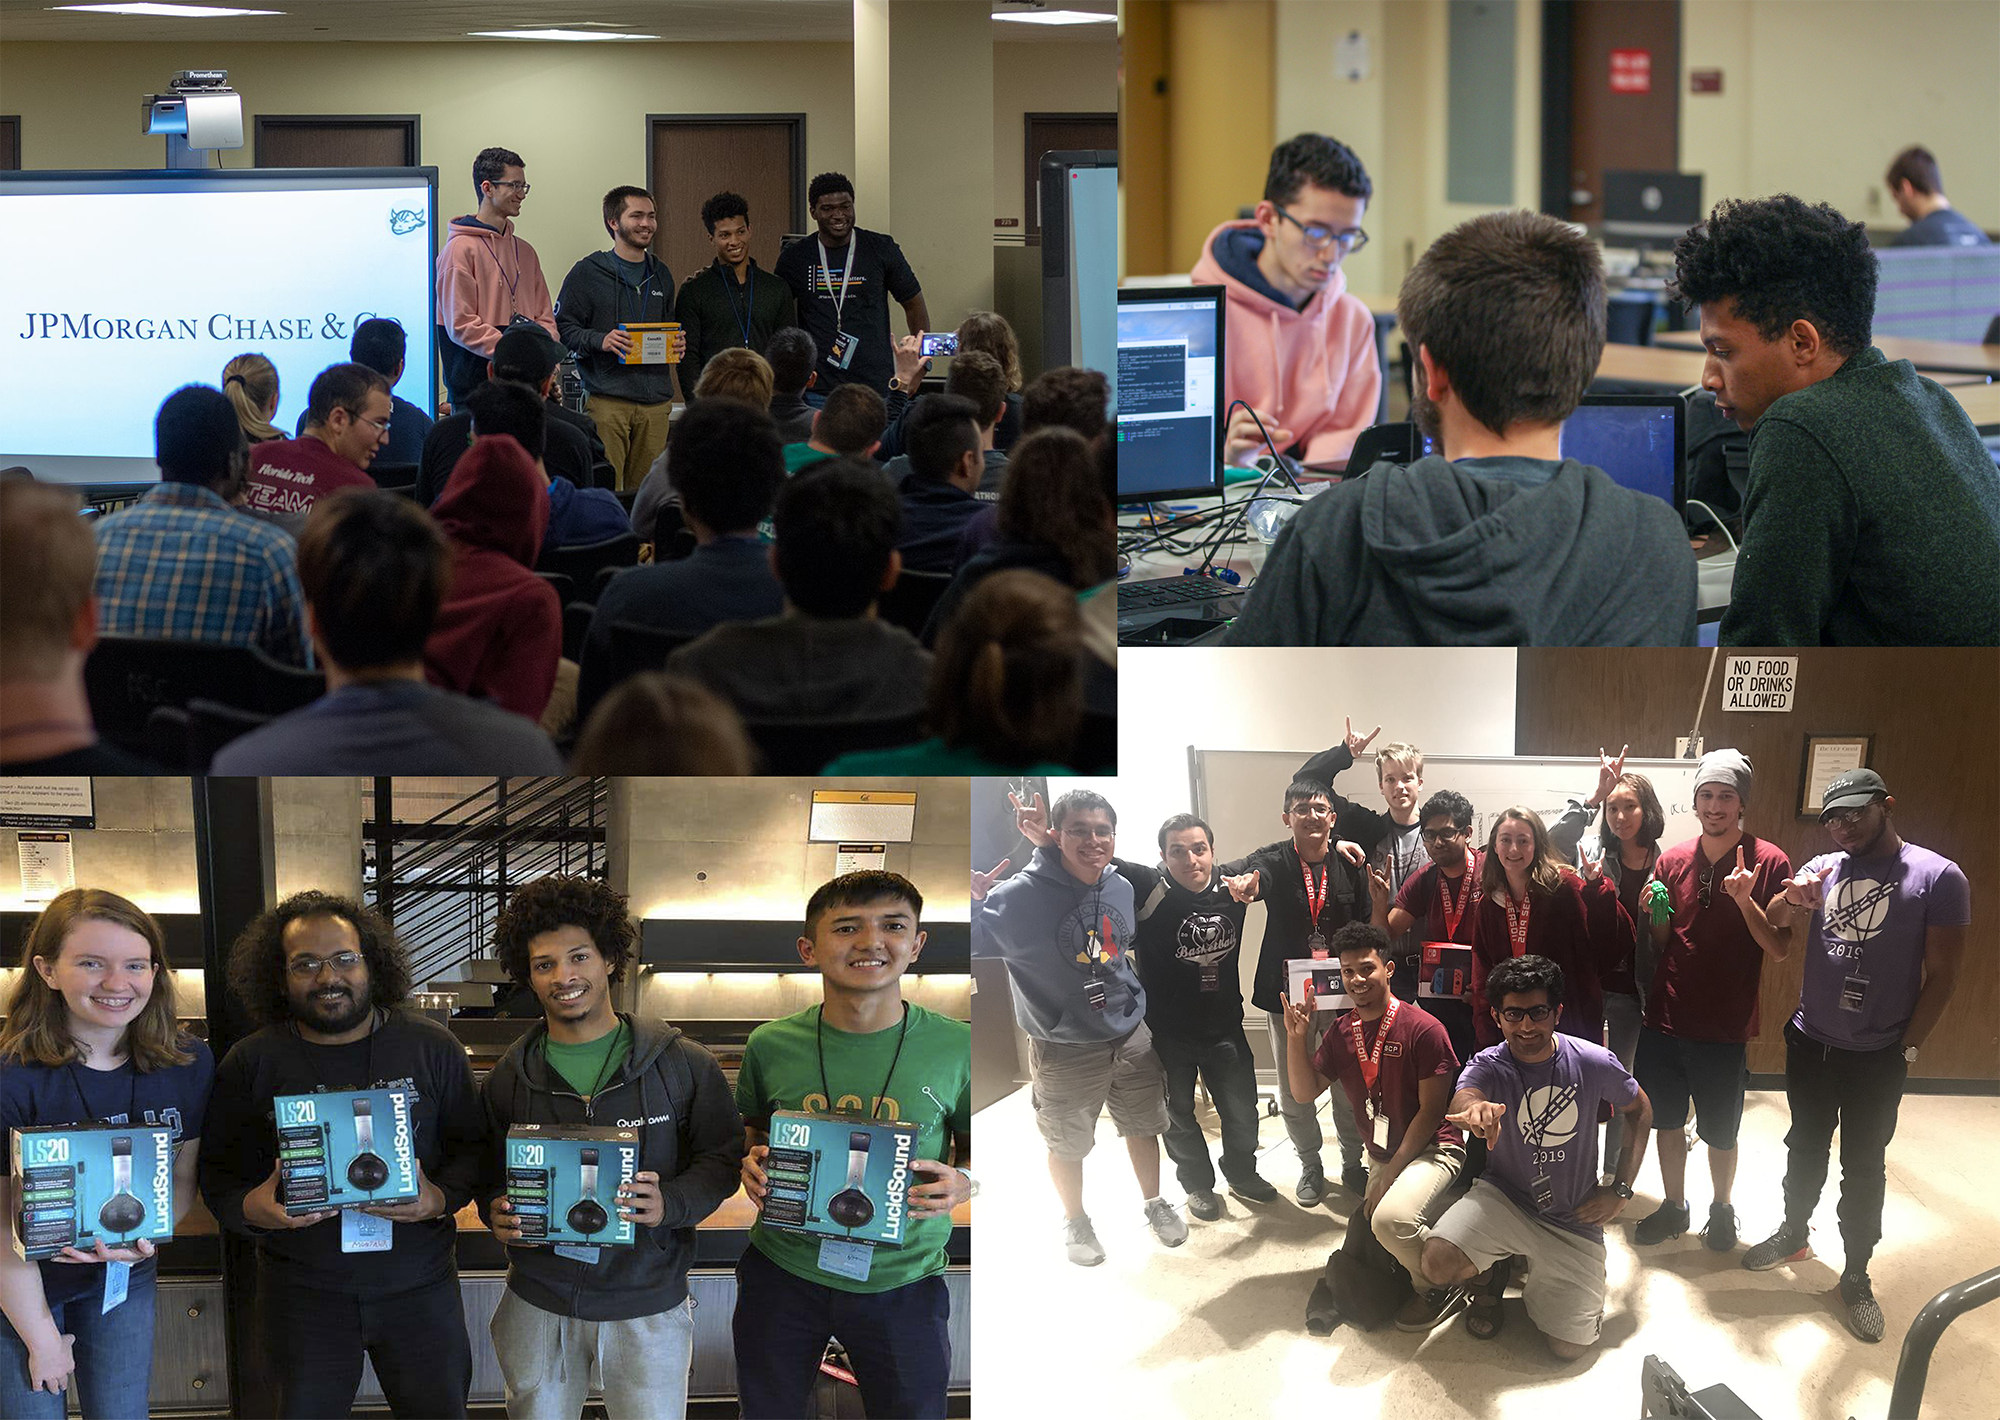 Willie McClinton (right of top right photo) has traveled to hackathons across the U.S. with the USF Society of Competitive Programmers and recently won first prize at UCF’s Knight Hacks 2019 (bottom right), as well as sponsor prizes at USF’s Hackabull 2019 (top left) and Caltech’s Cal Hacks 5.0 2018 (bottom left).